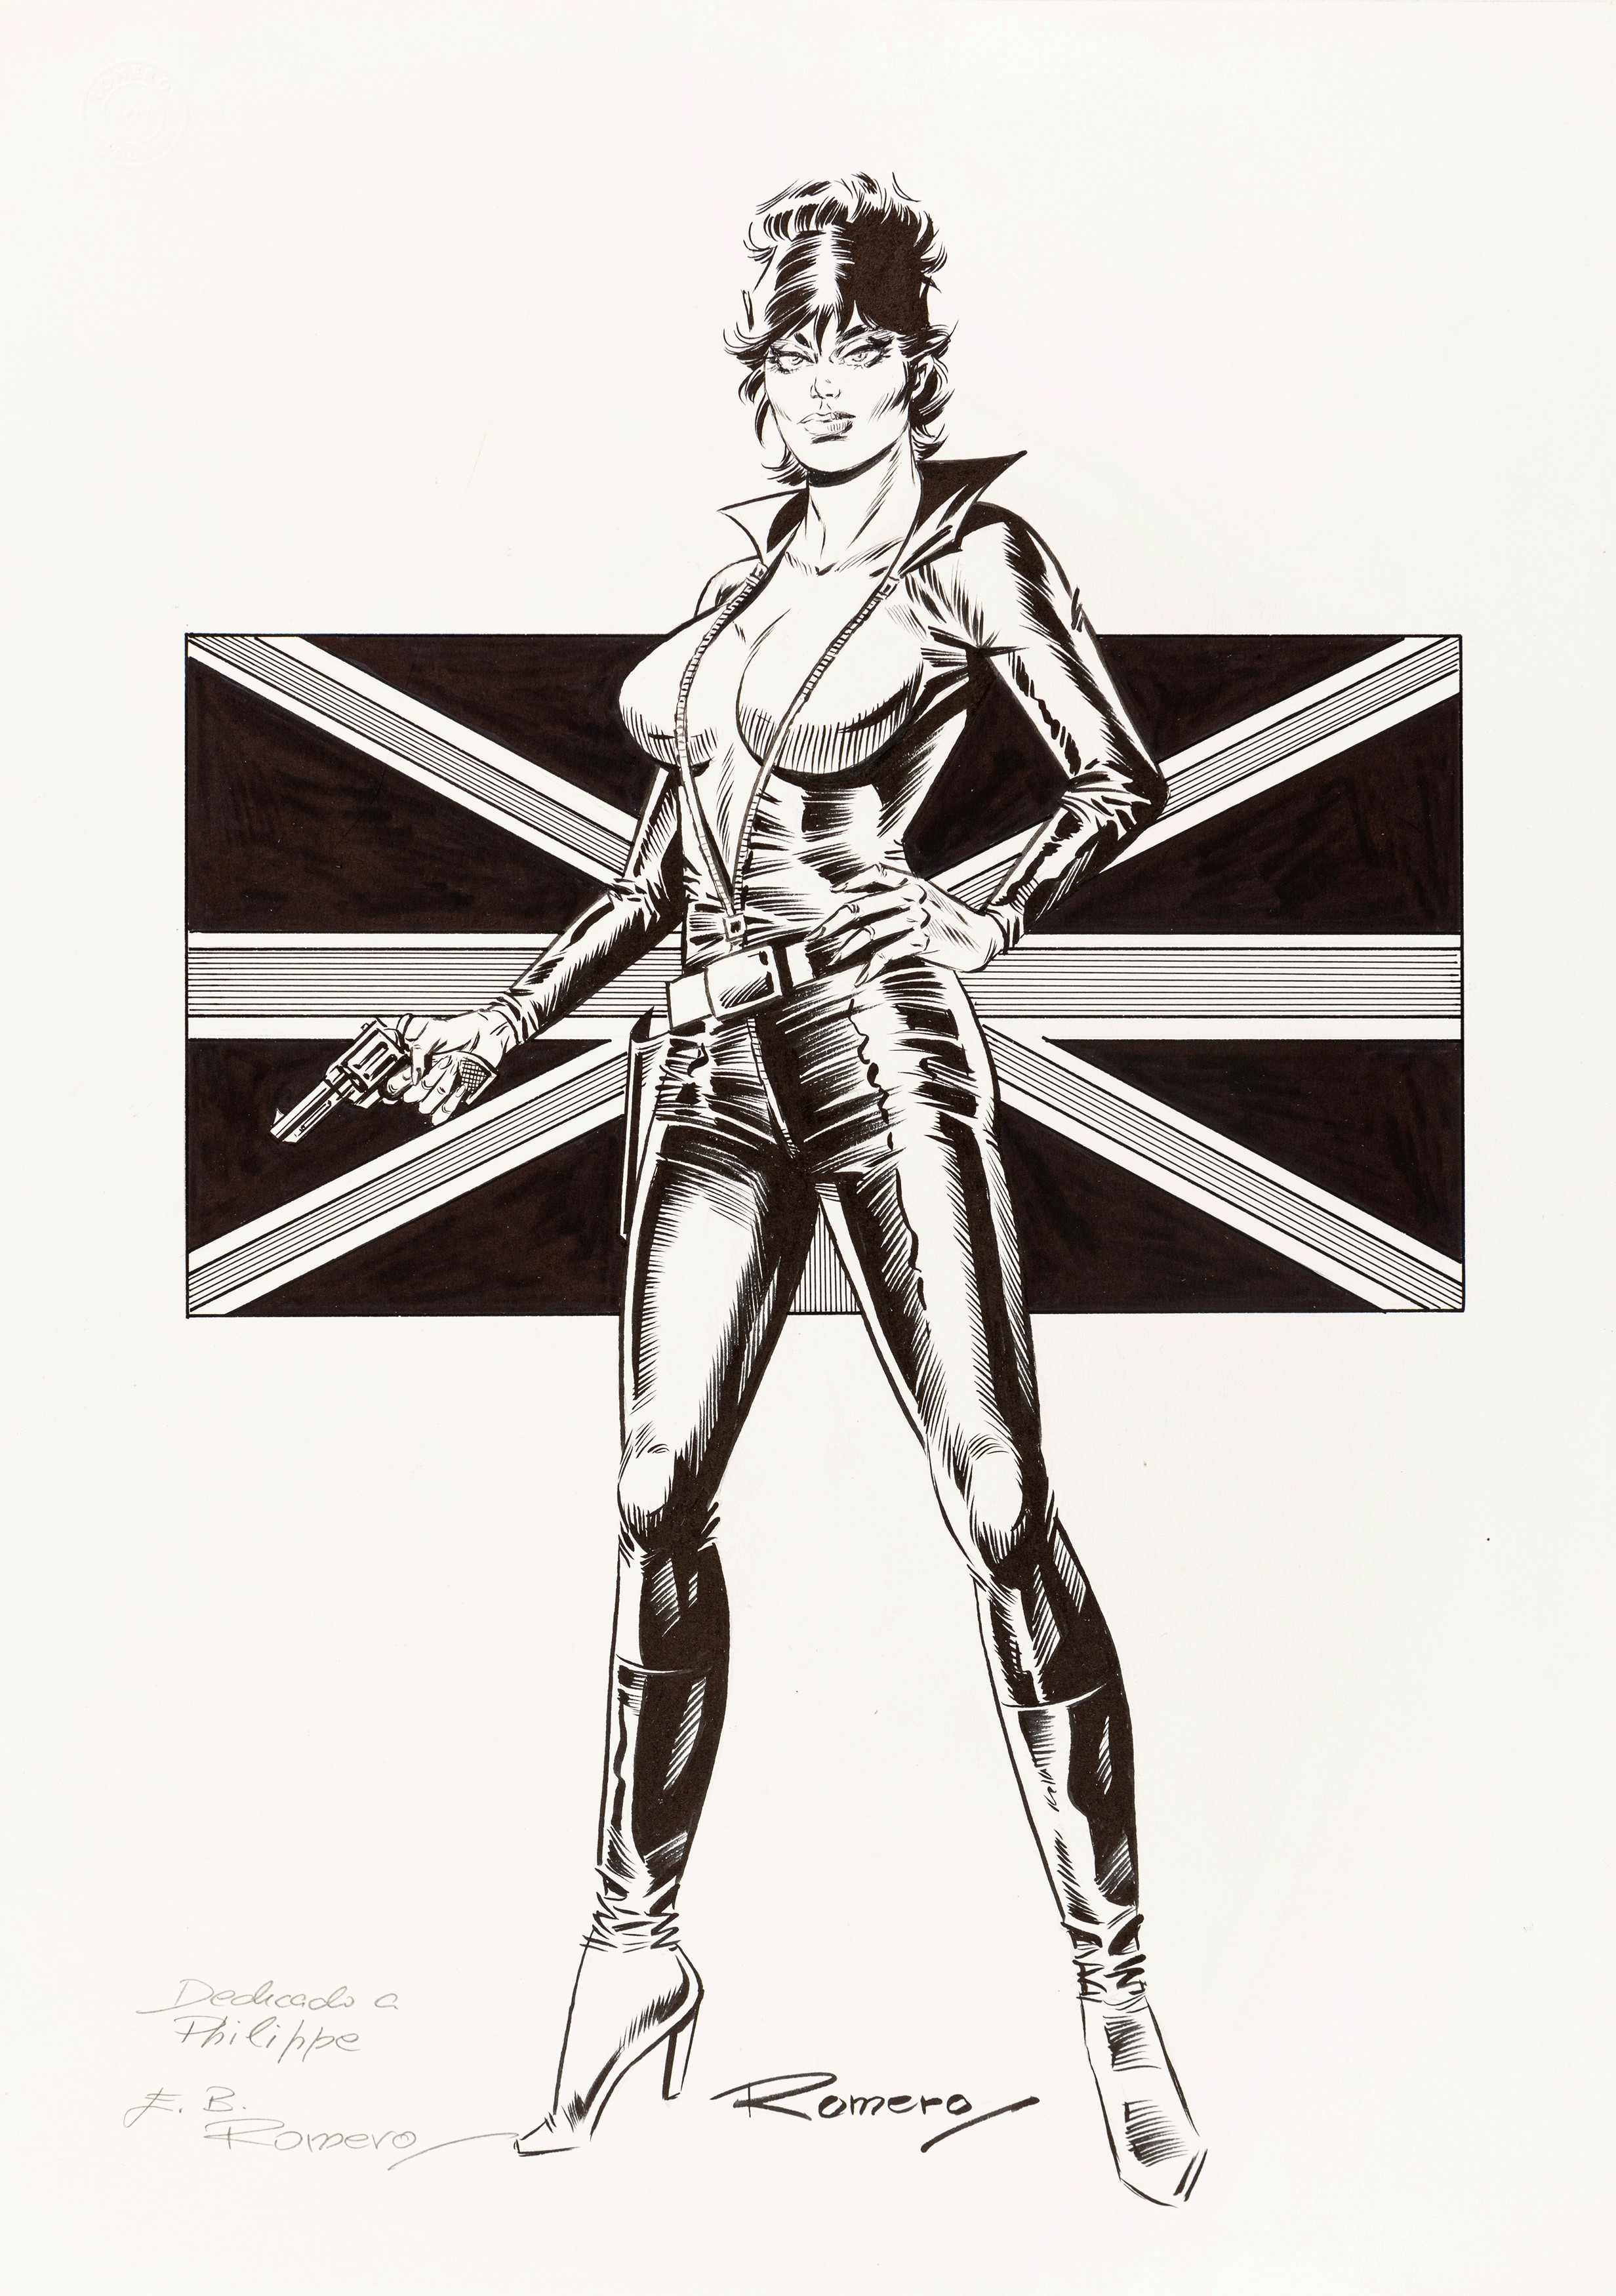 Artwork by Enrique Badía Romero, Modesty Blaise, Made of pencil and ink on thin cardboard